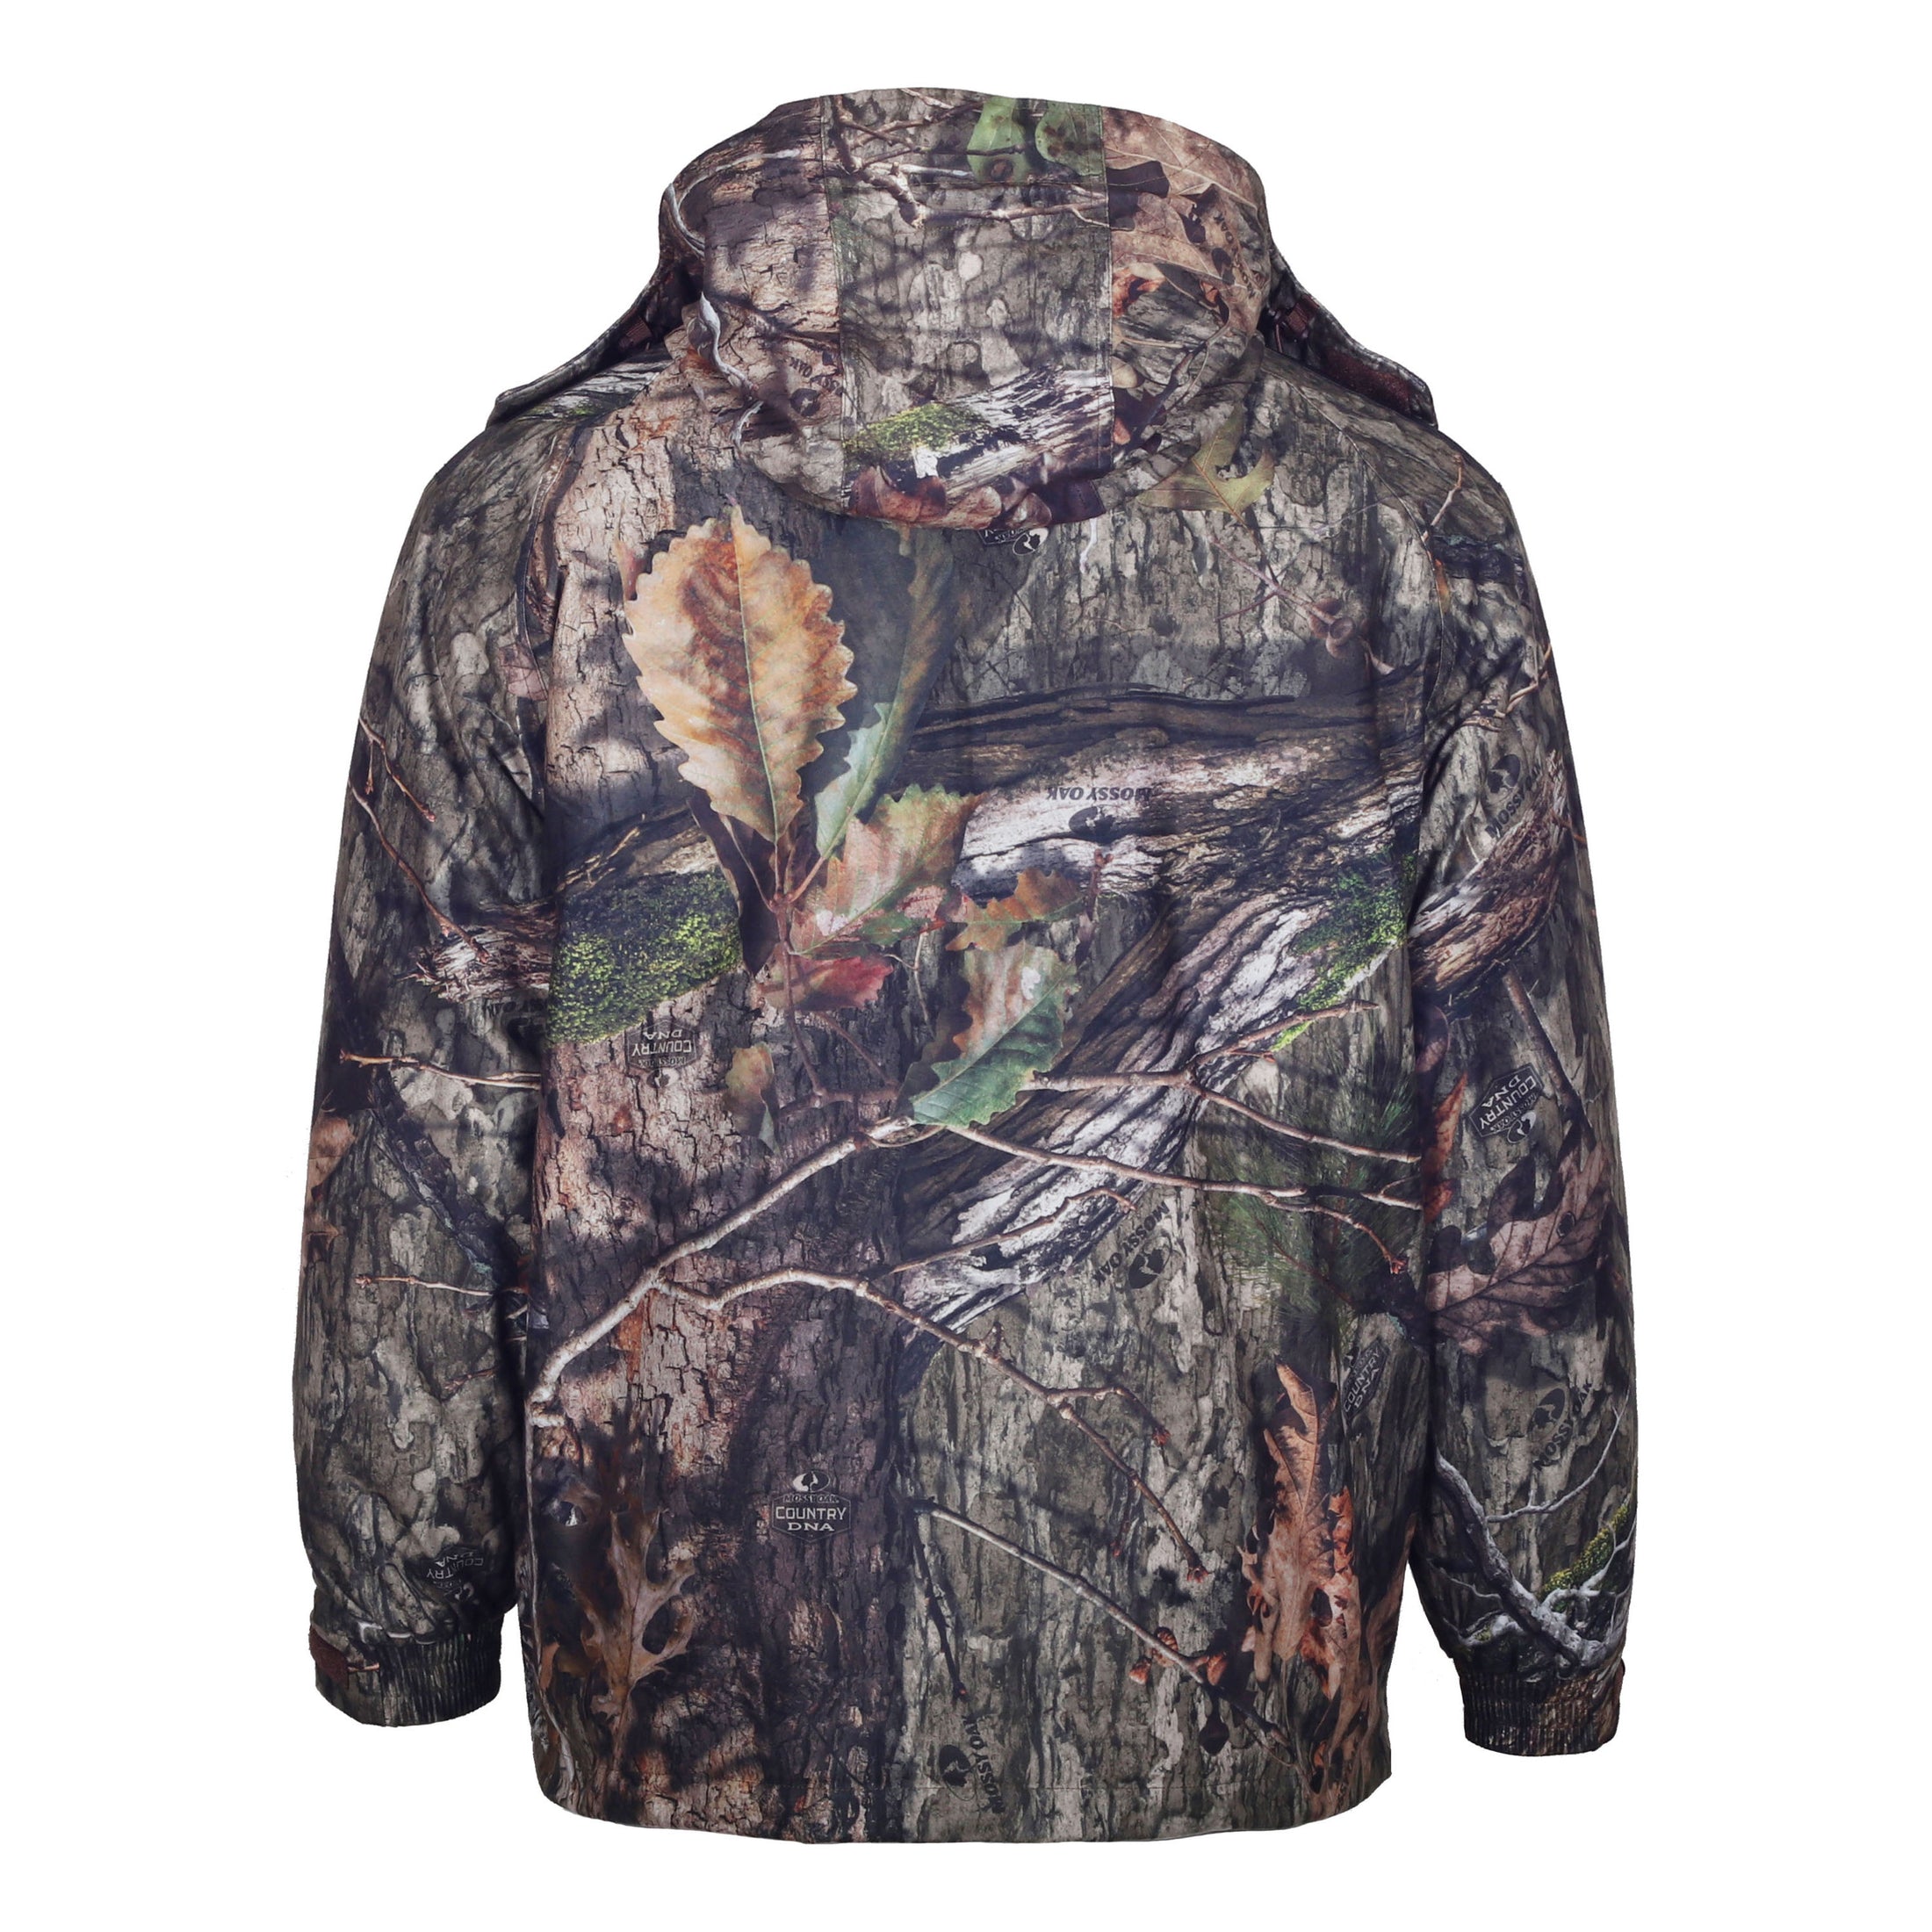 gamehide wild systems parka back view (mossy oak dna)